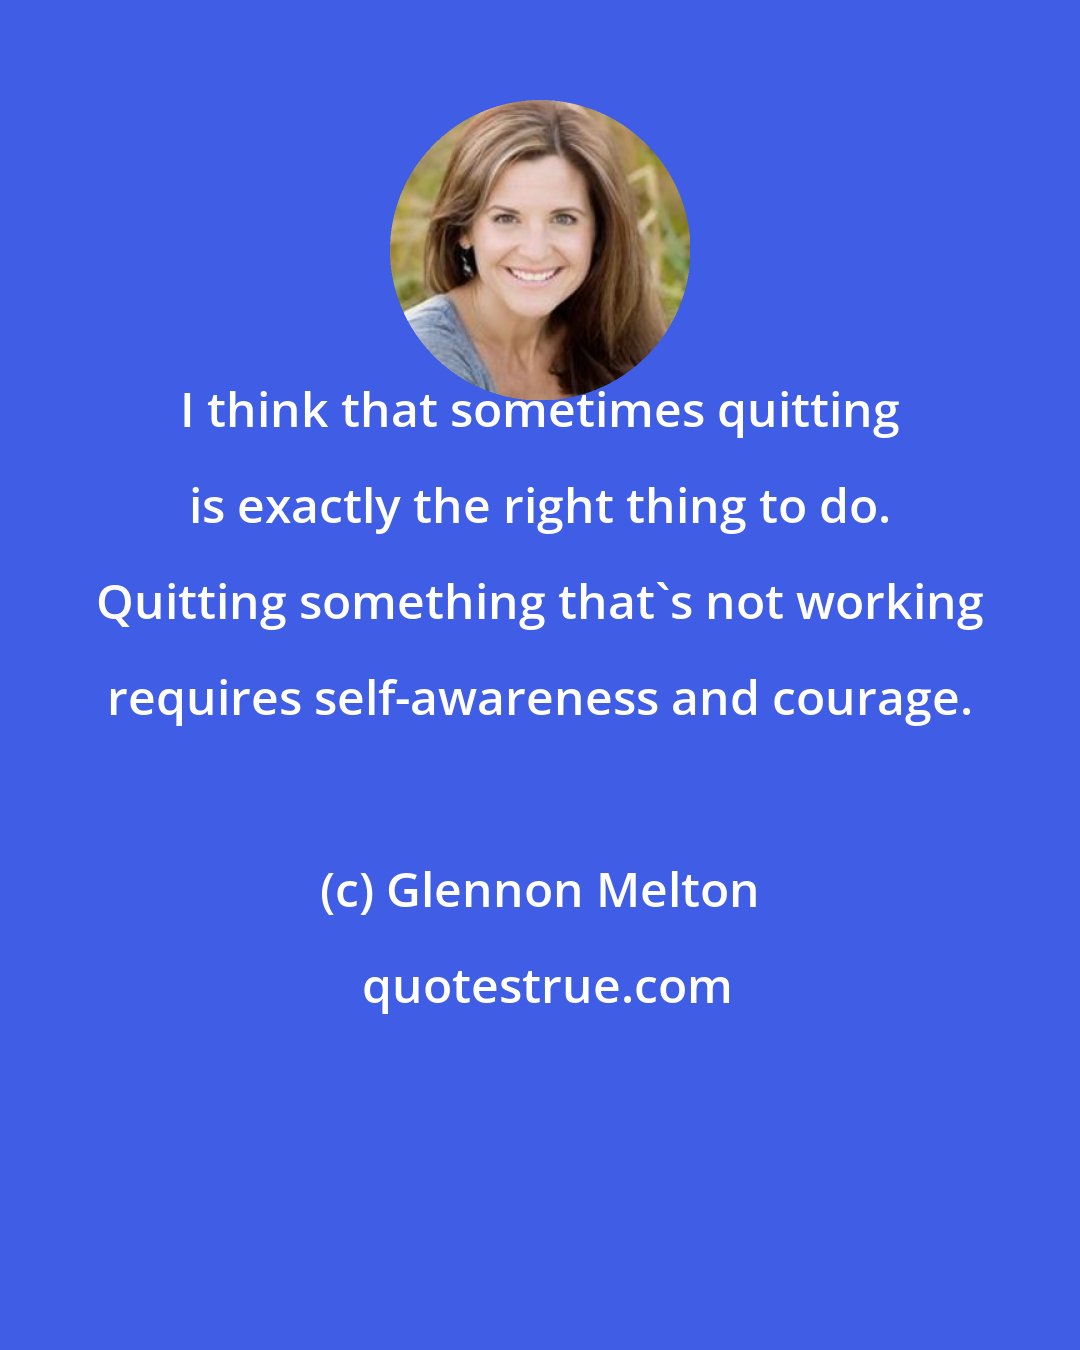 Glennon Melton: I think that sometimes quitting is exactly the right thing to do. Quitting something that's not working requires self-awareness and courage.